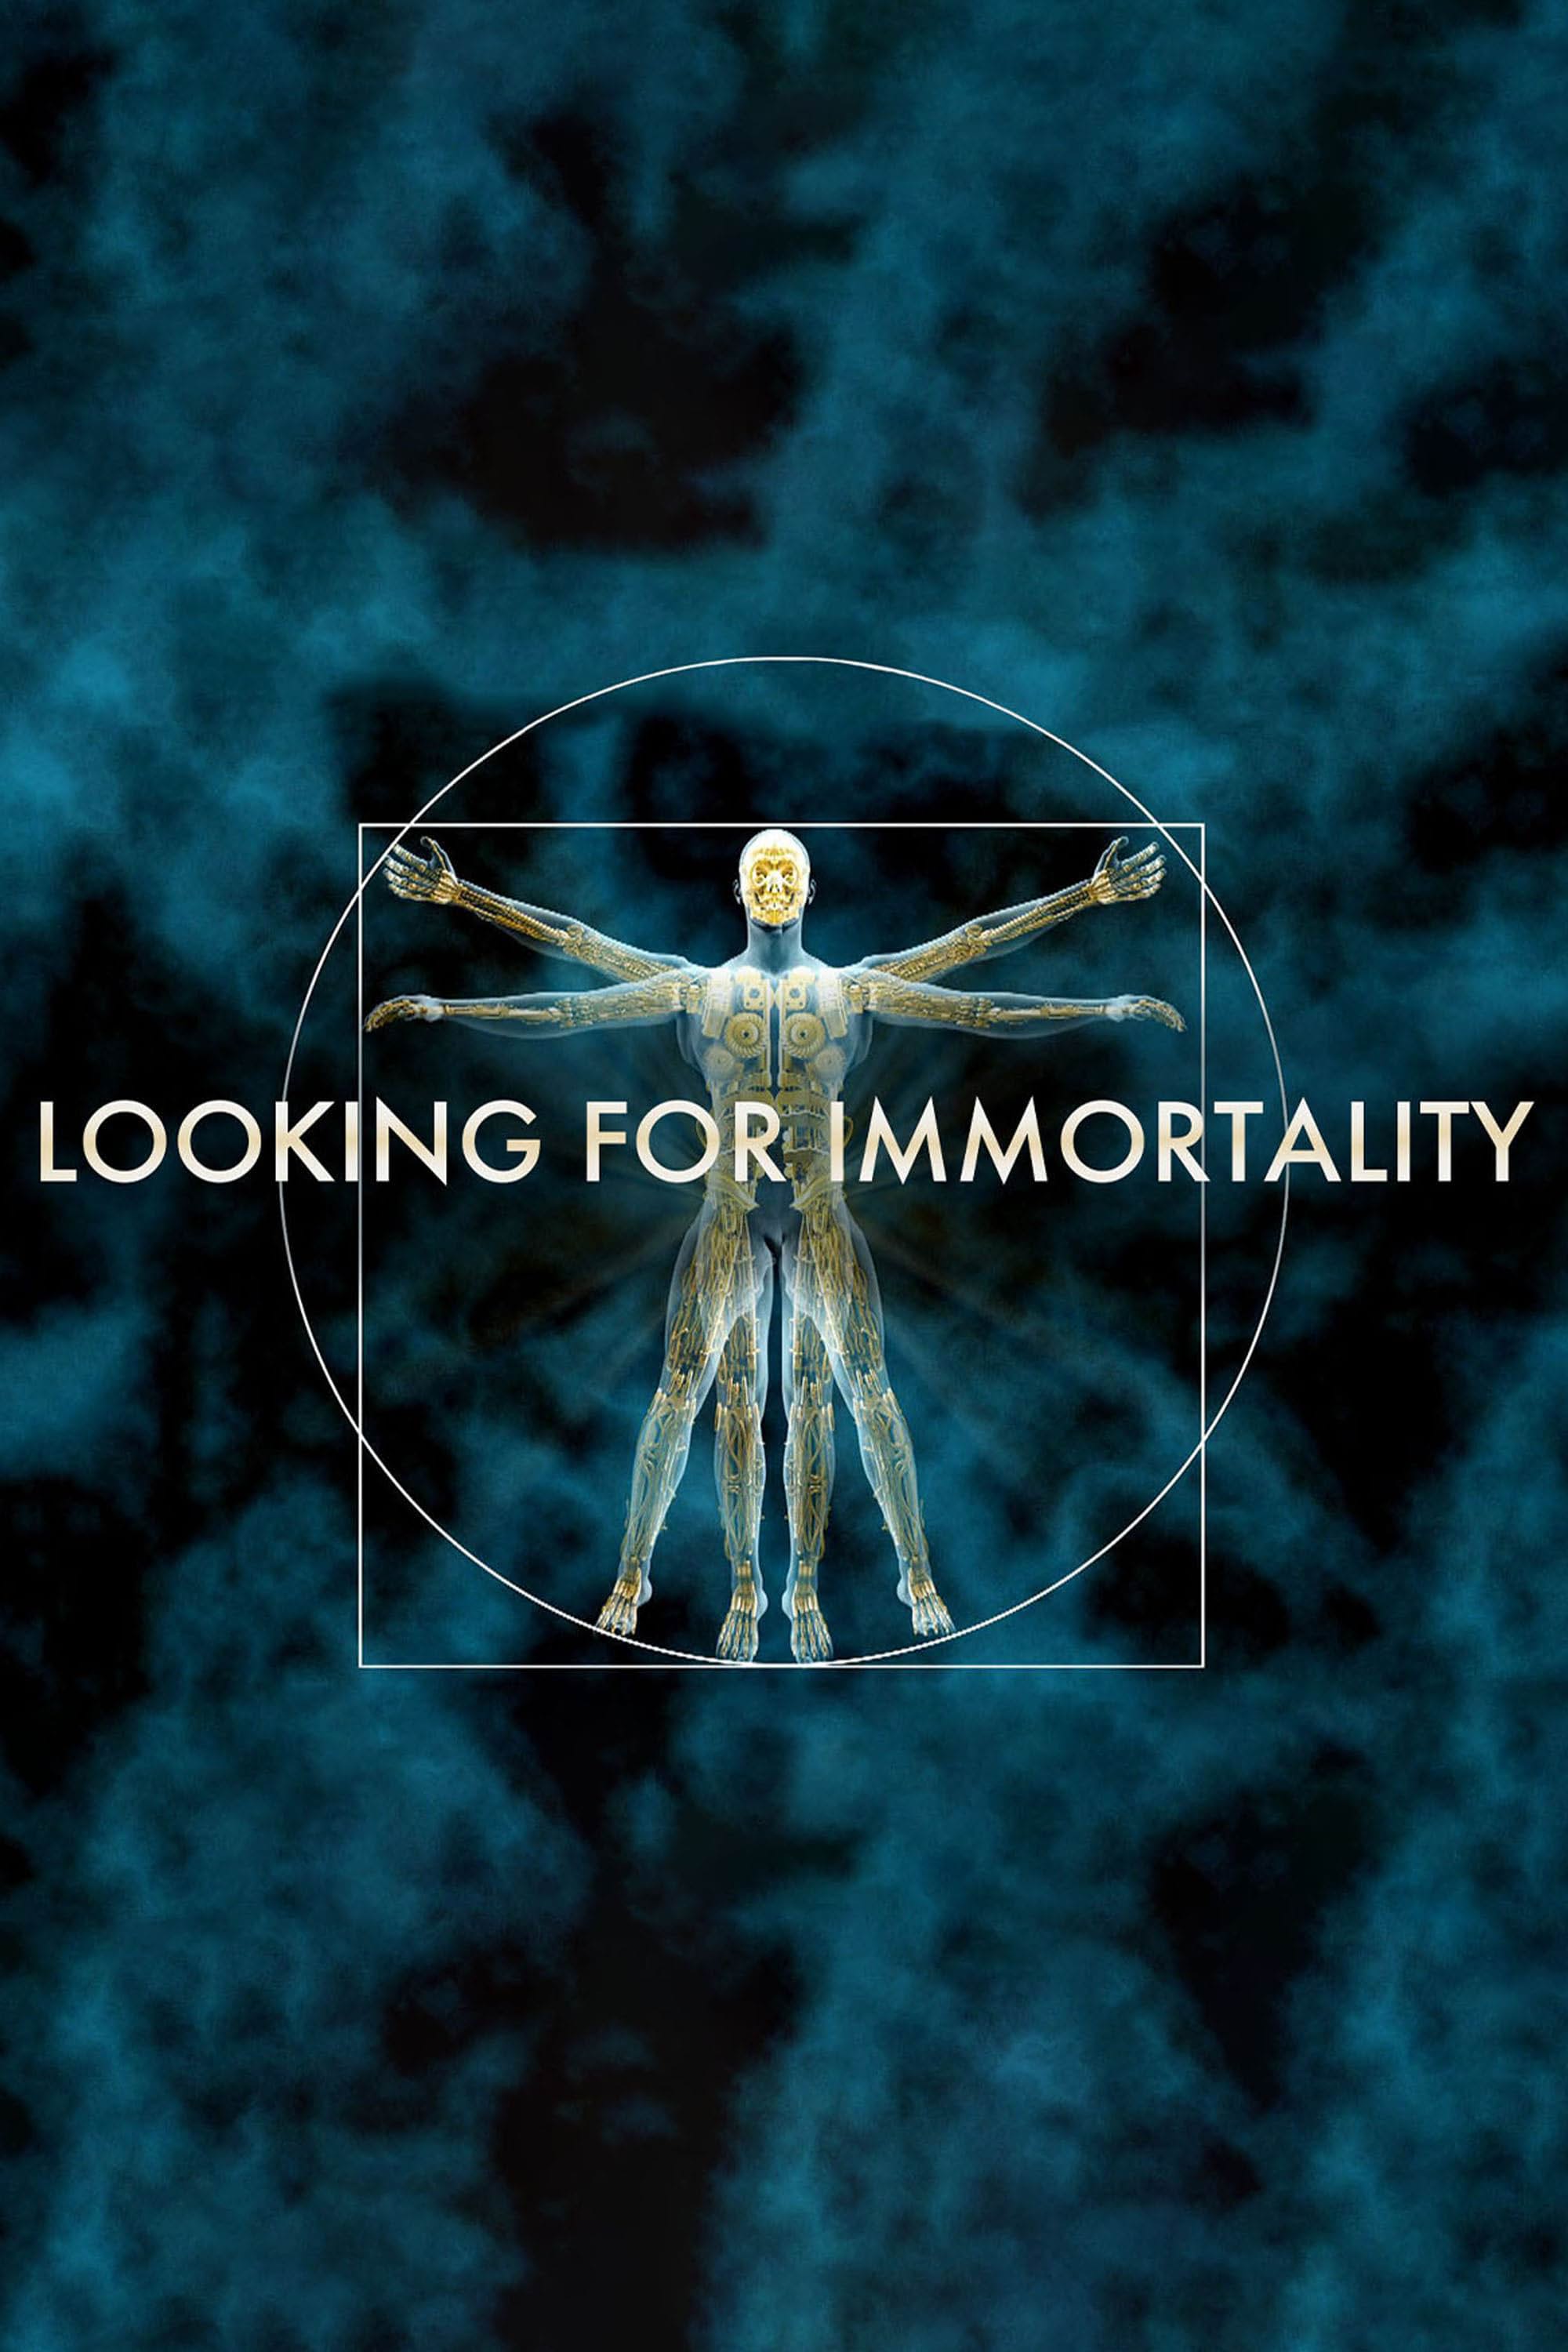     Looking for Immortality